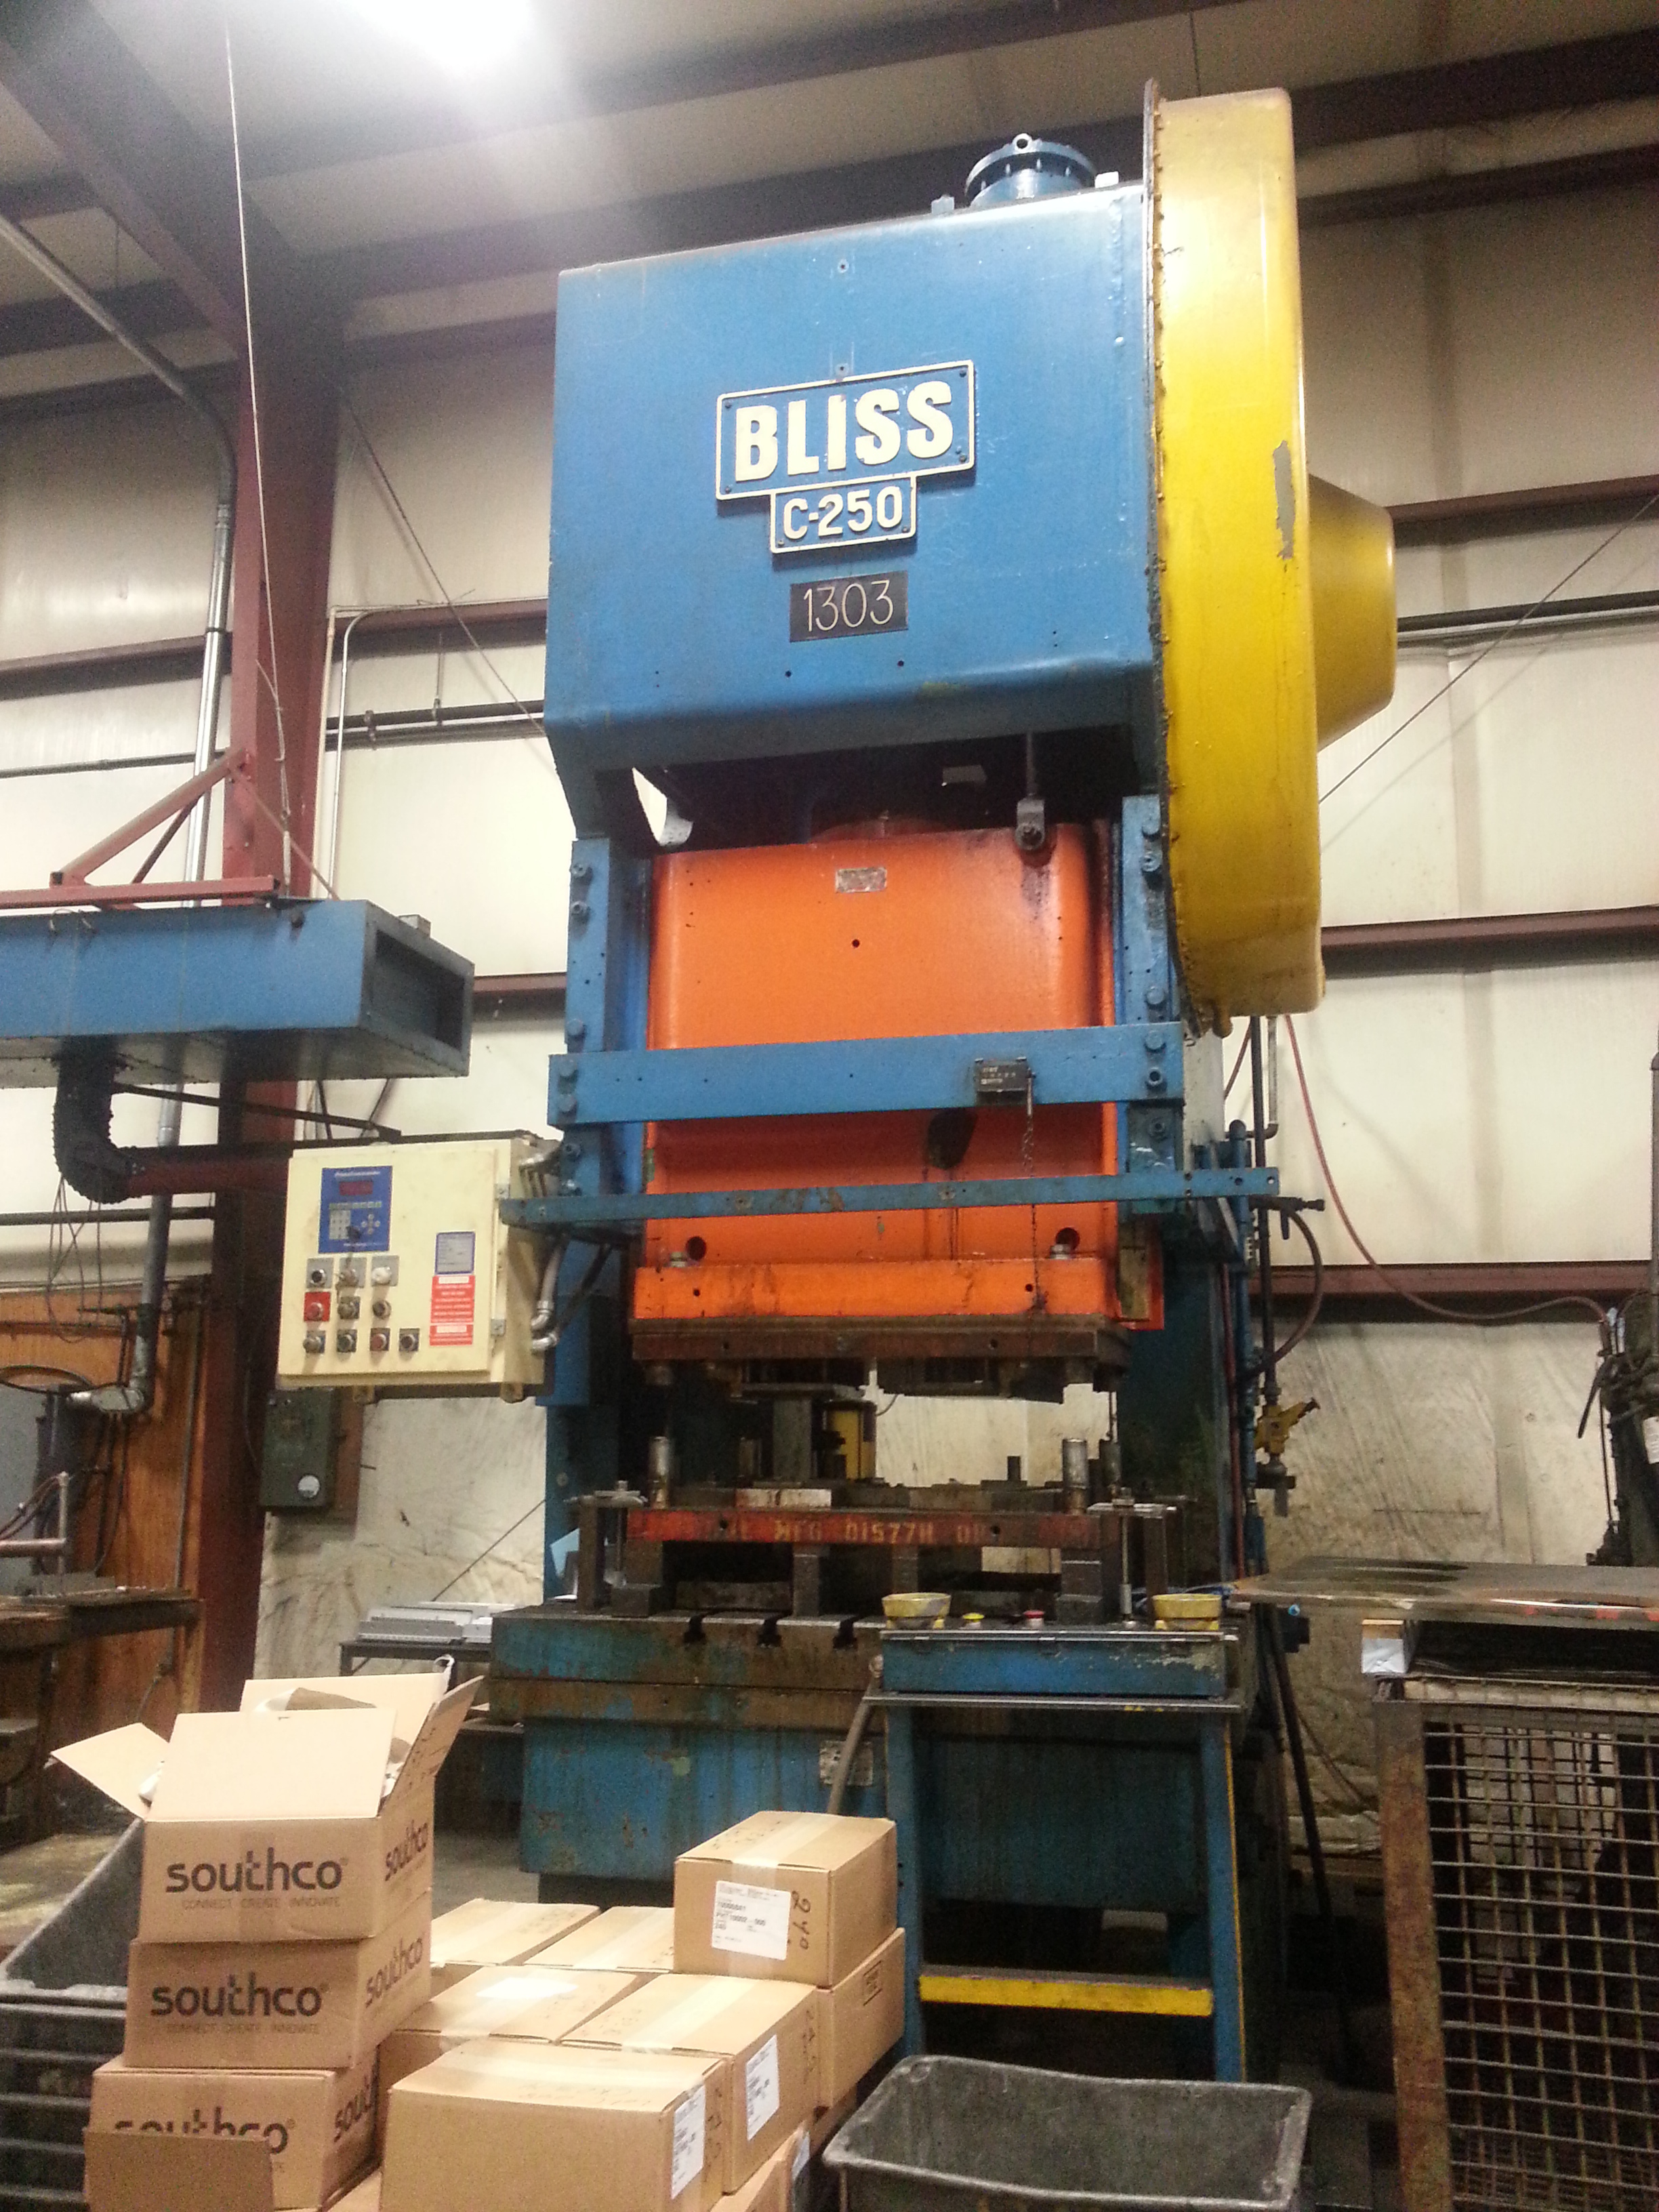 250 Ton Bliss C-250 OBI Used Metal Stamping Punch Press For Sale C-250